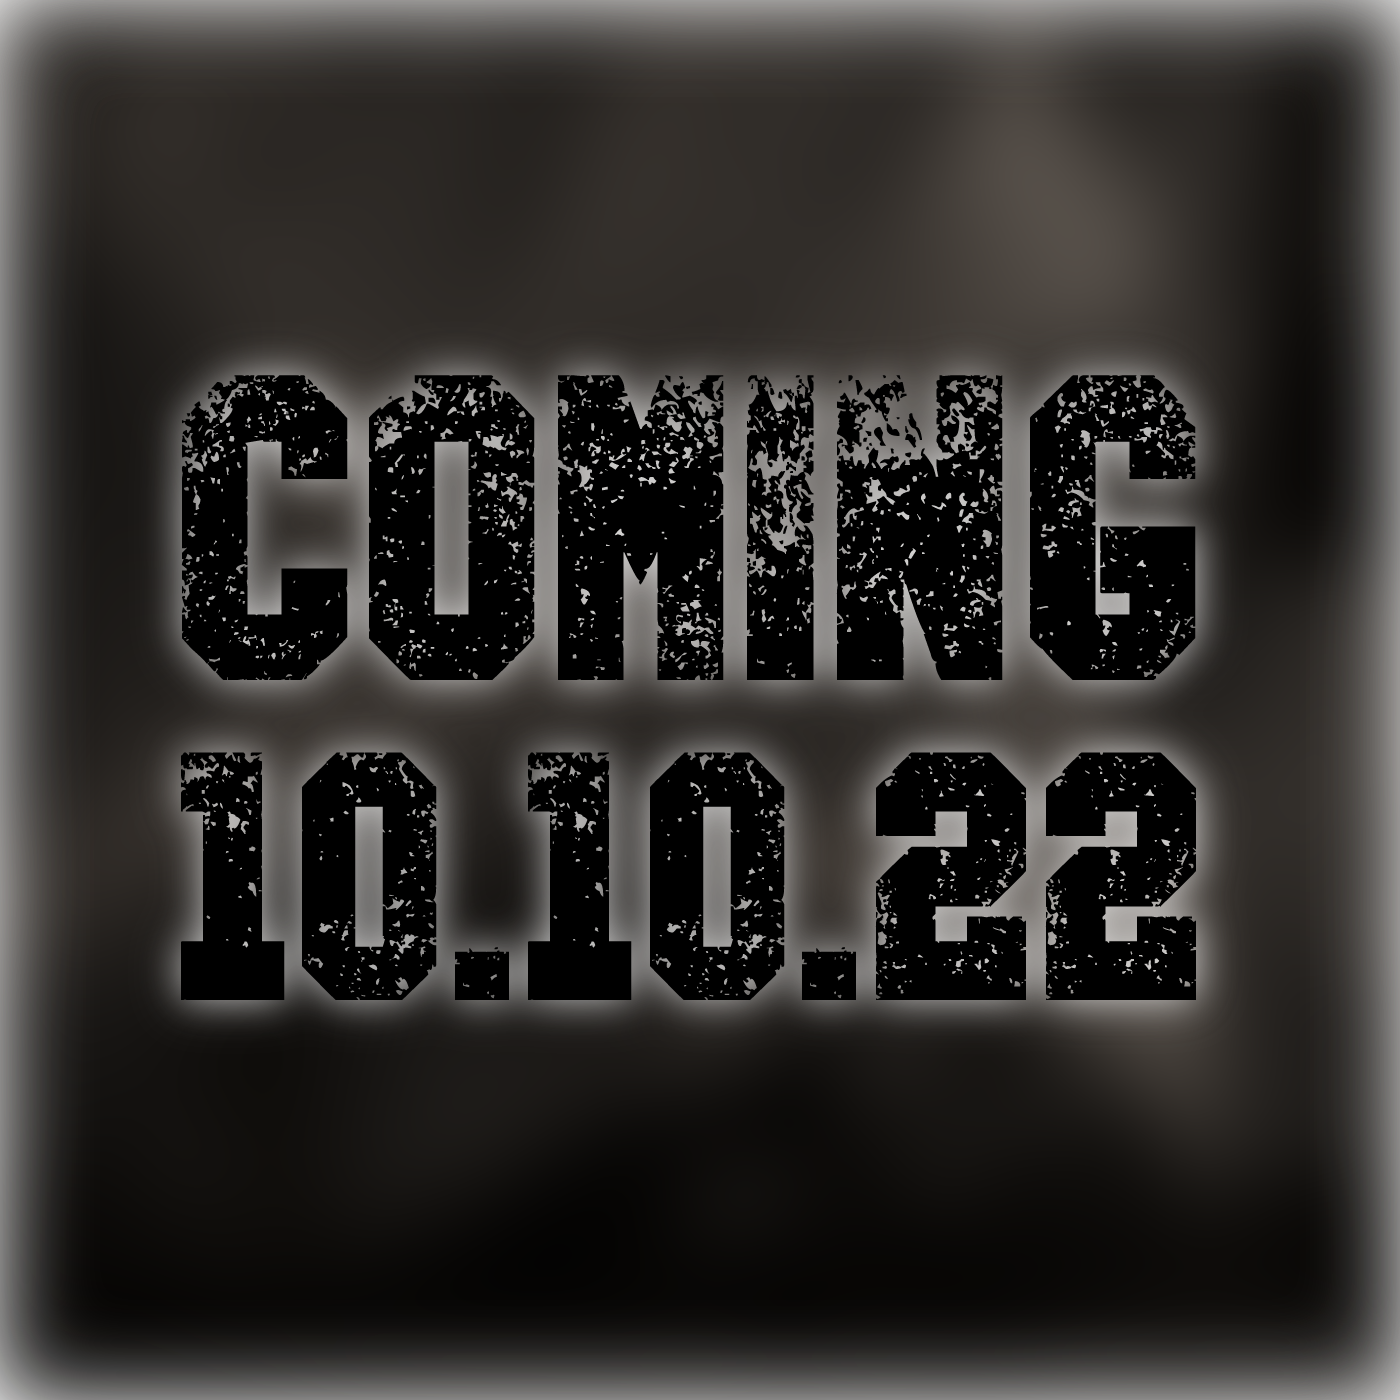 Coming 10.10.22